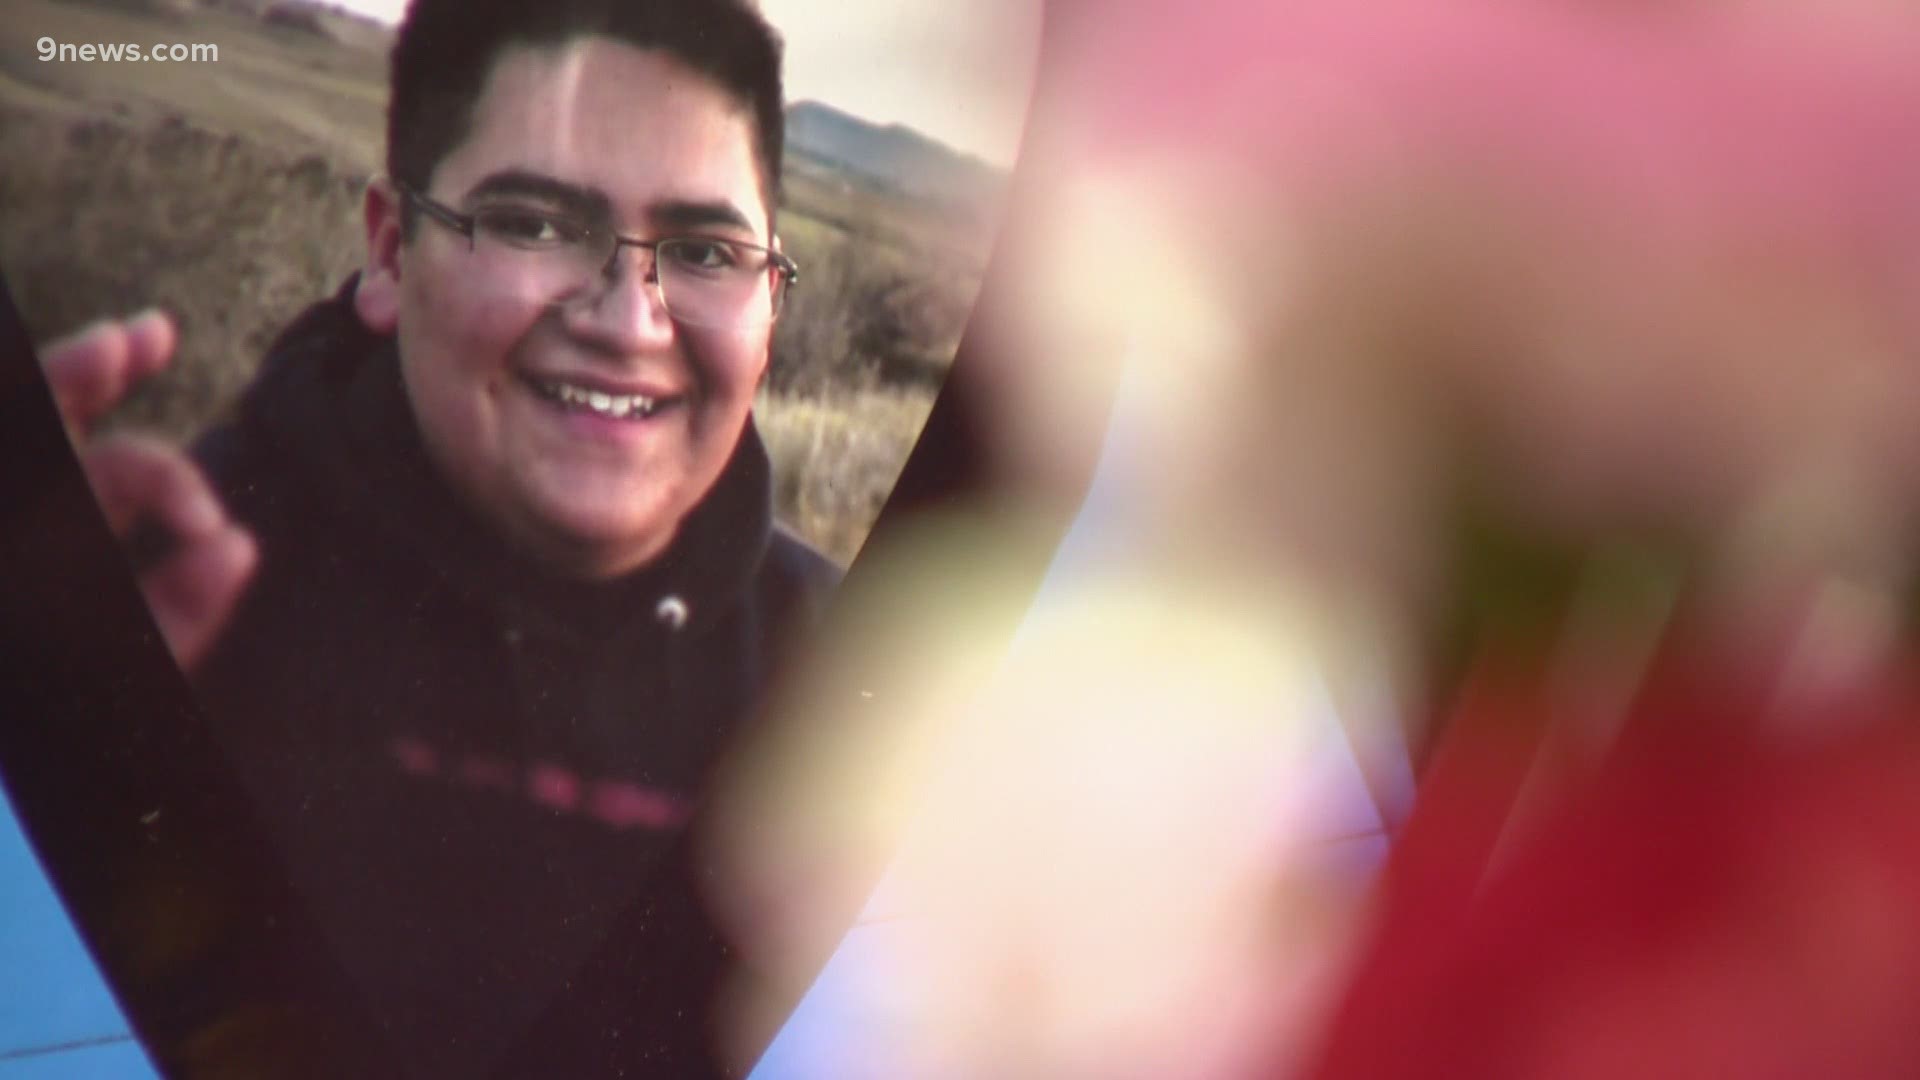 Kendrick Castillo died saving the lives of his classmates. The 18-year-old is remembered for his love of robotics, science and helping others.